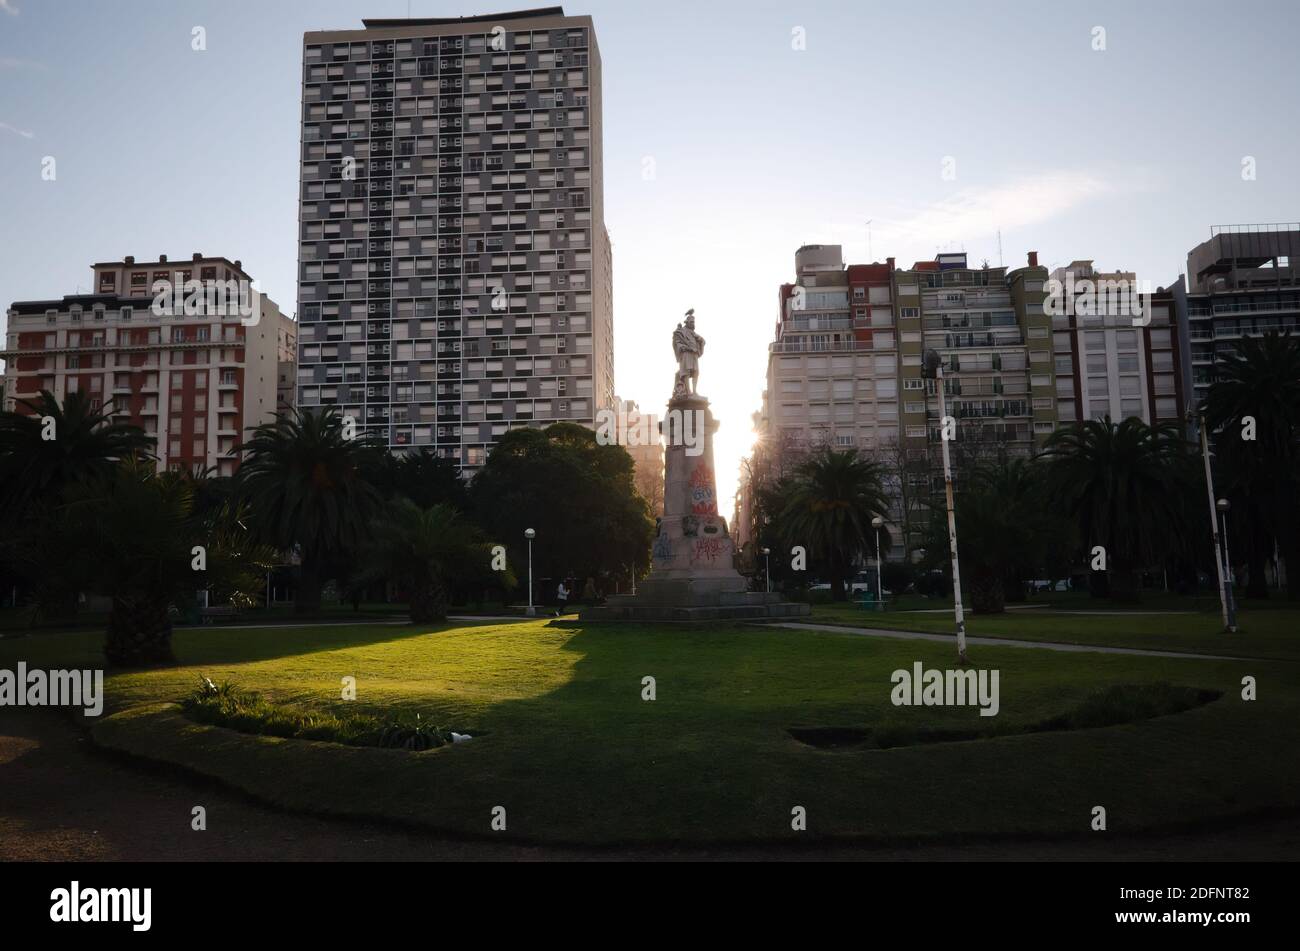 Mar del Plata, Buenos Aires province, Argentina - July, 2020: Monument of Cristobal Colon (Christopher Columbus) against sunlight at Plaza Colon Stock Photo